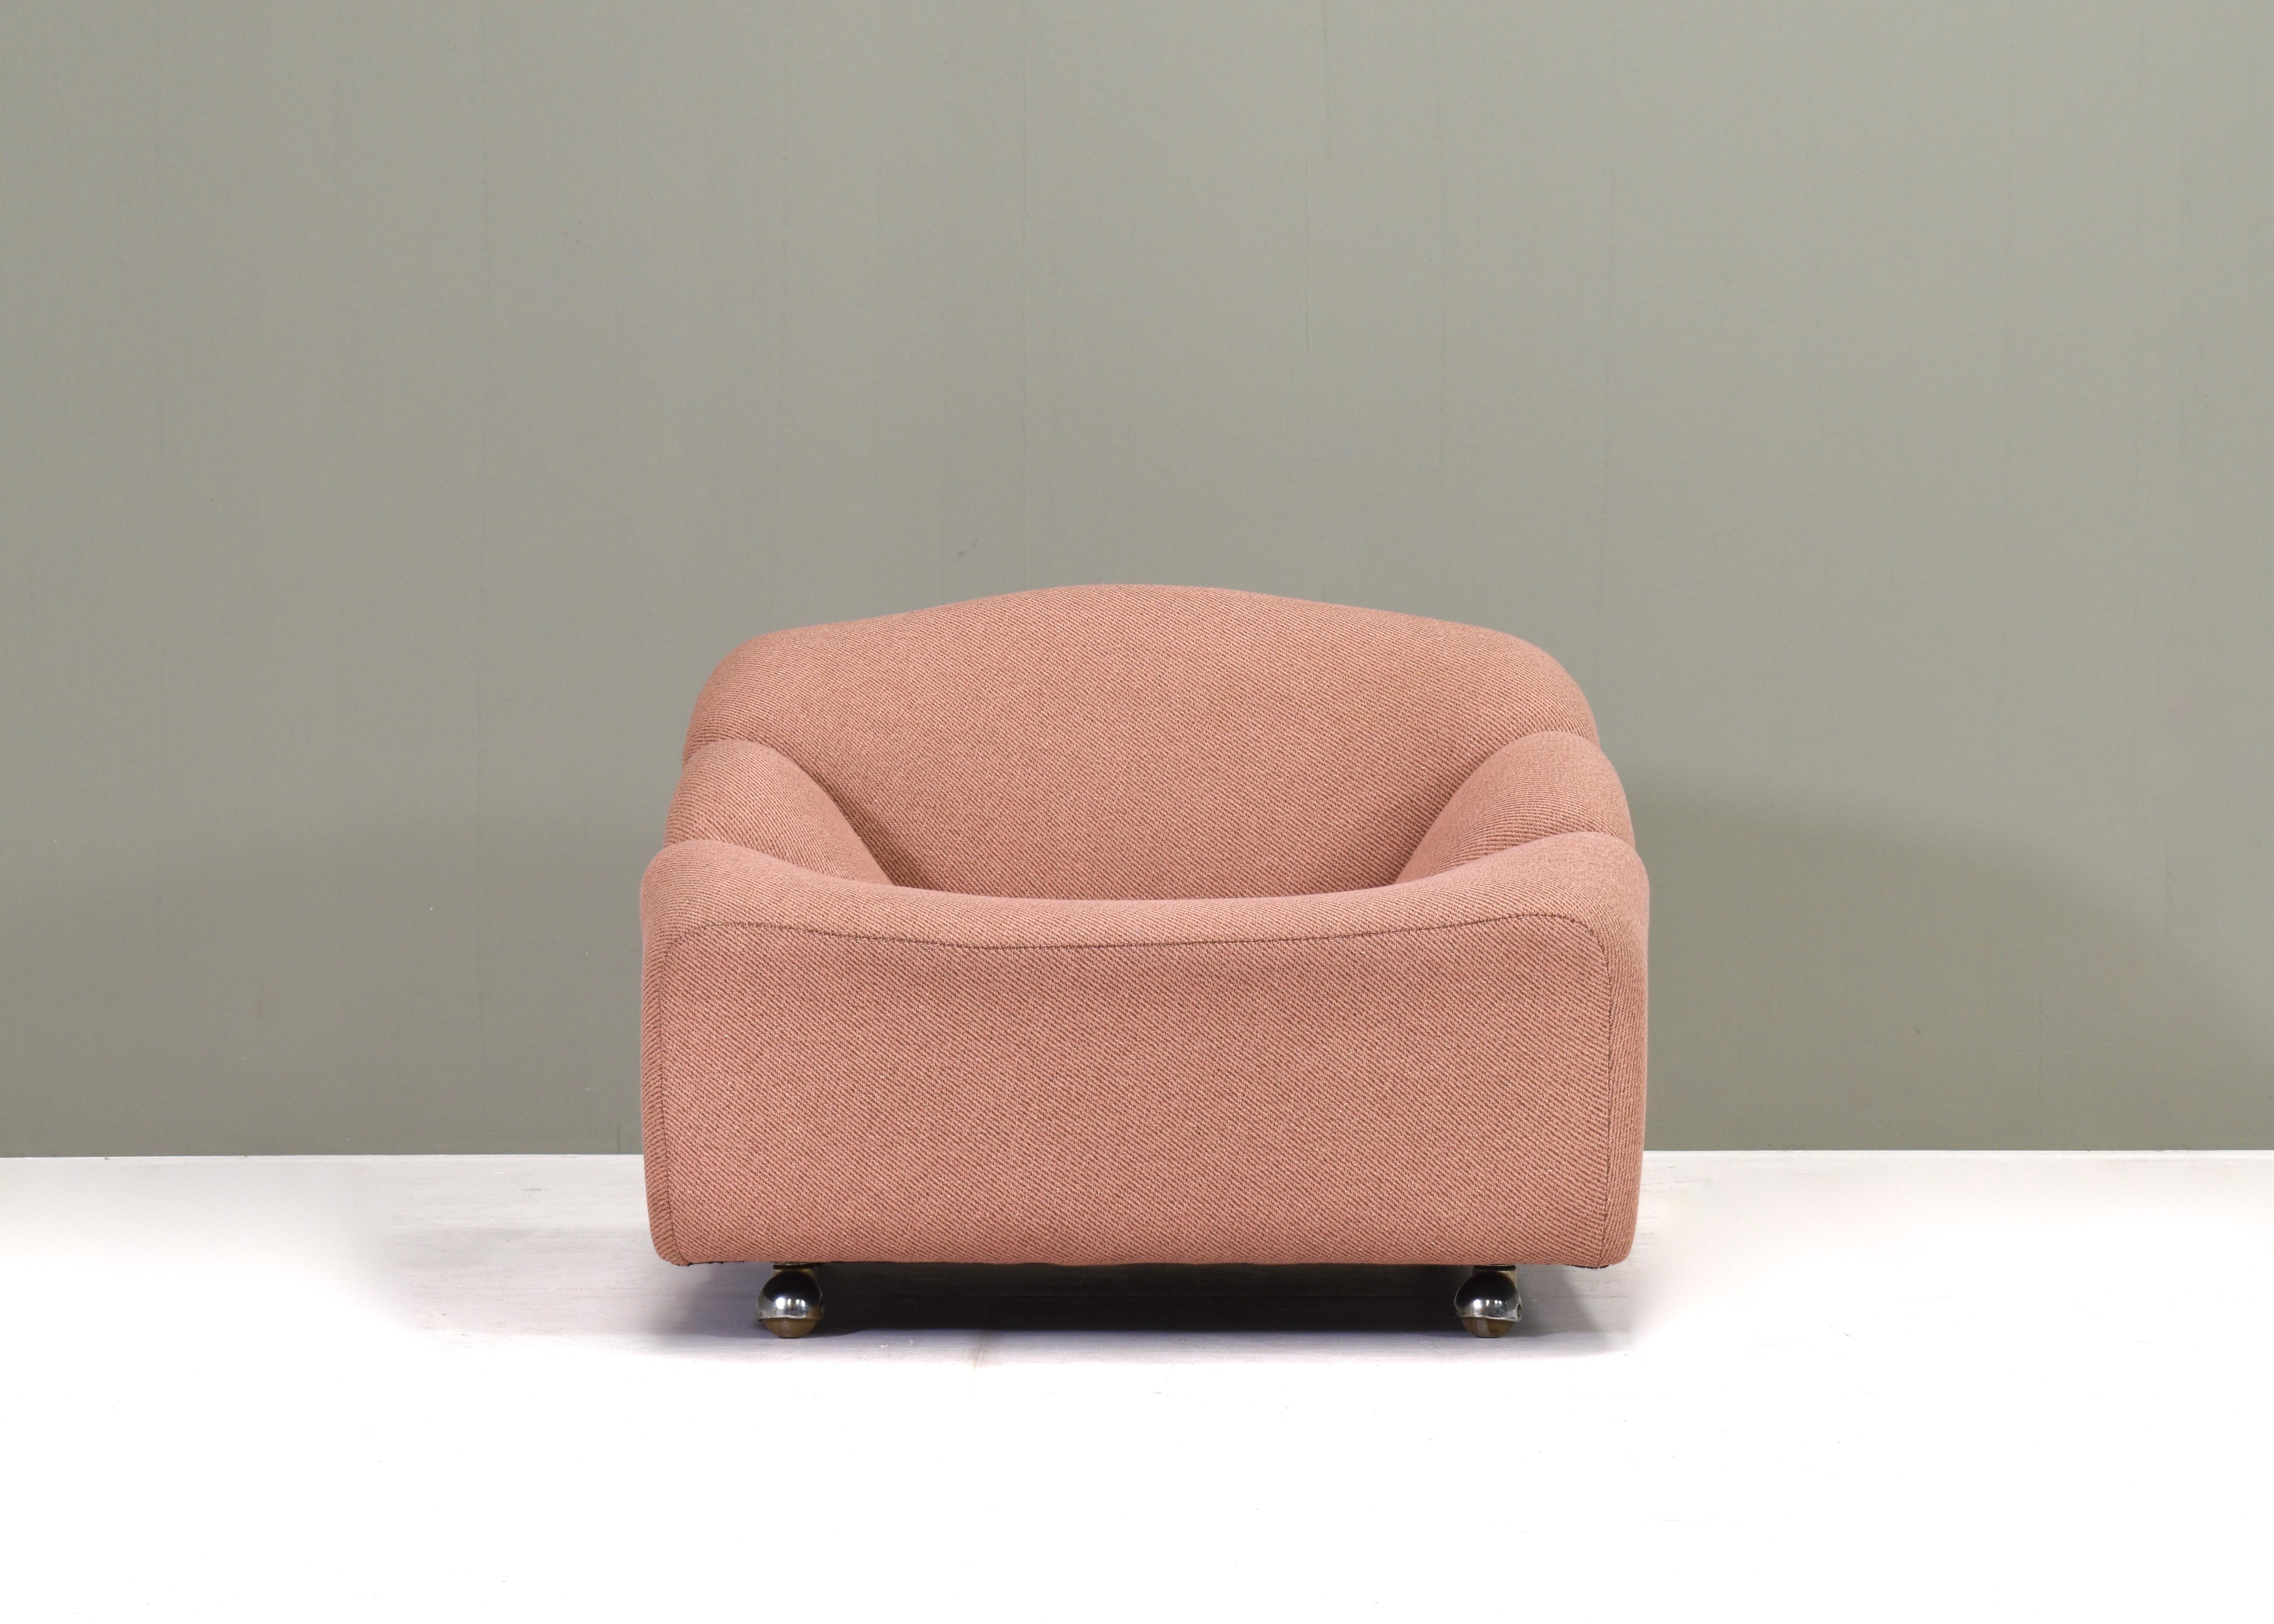 Mid-20th Century ABCD Armchair by Pierre Paulin for ARTIFORT Original Fabric, Netherlands - 1968